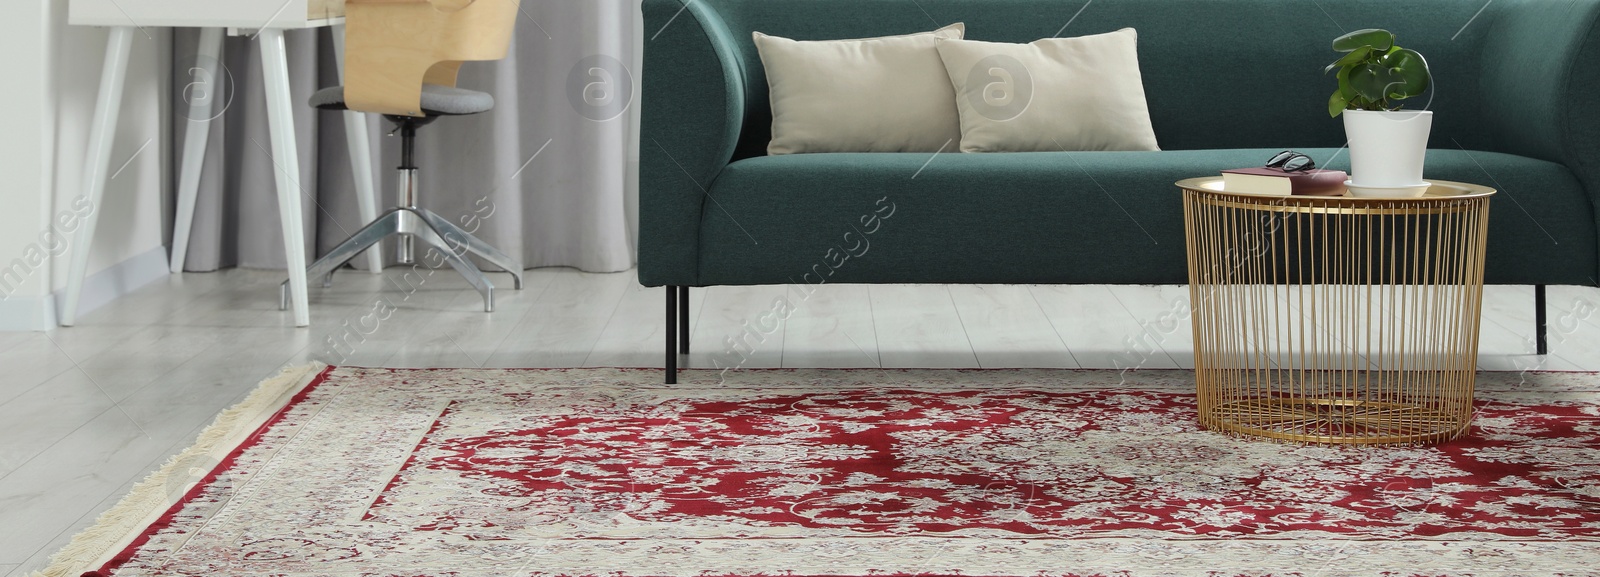 Image of Stylish living room interior with beautiful carpet and furniture. Banner design